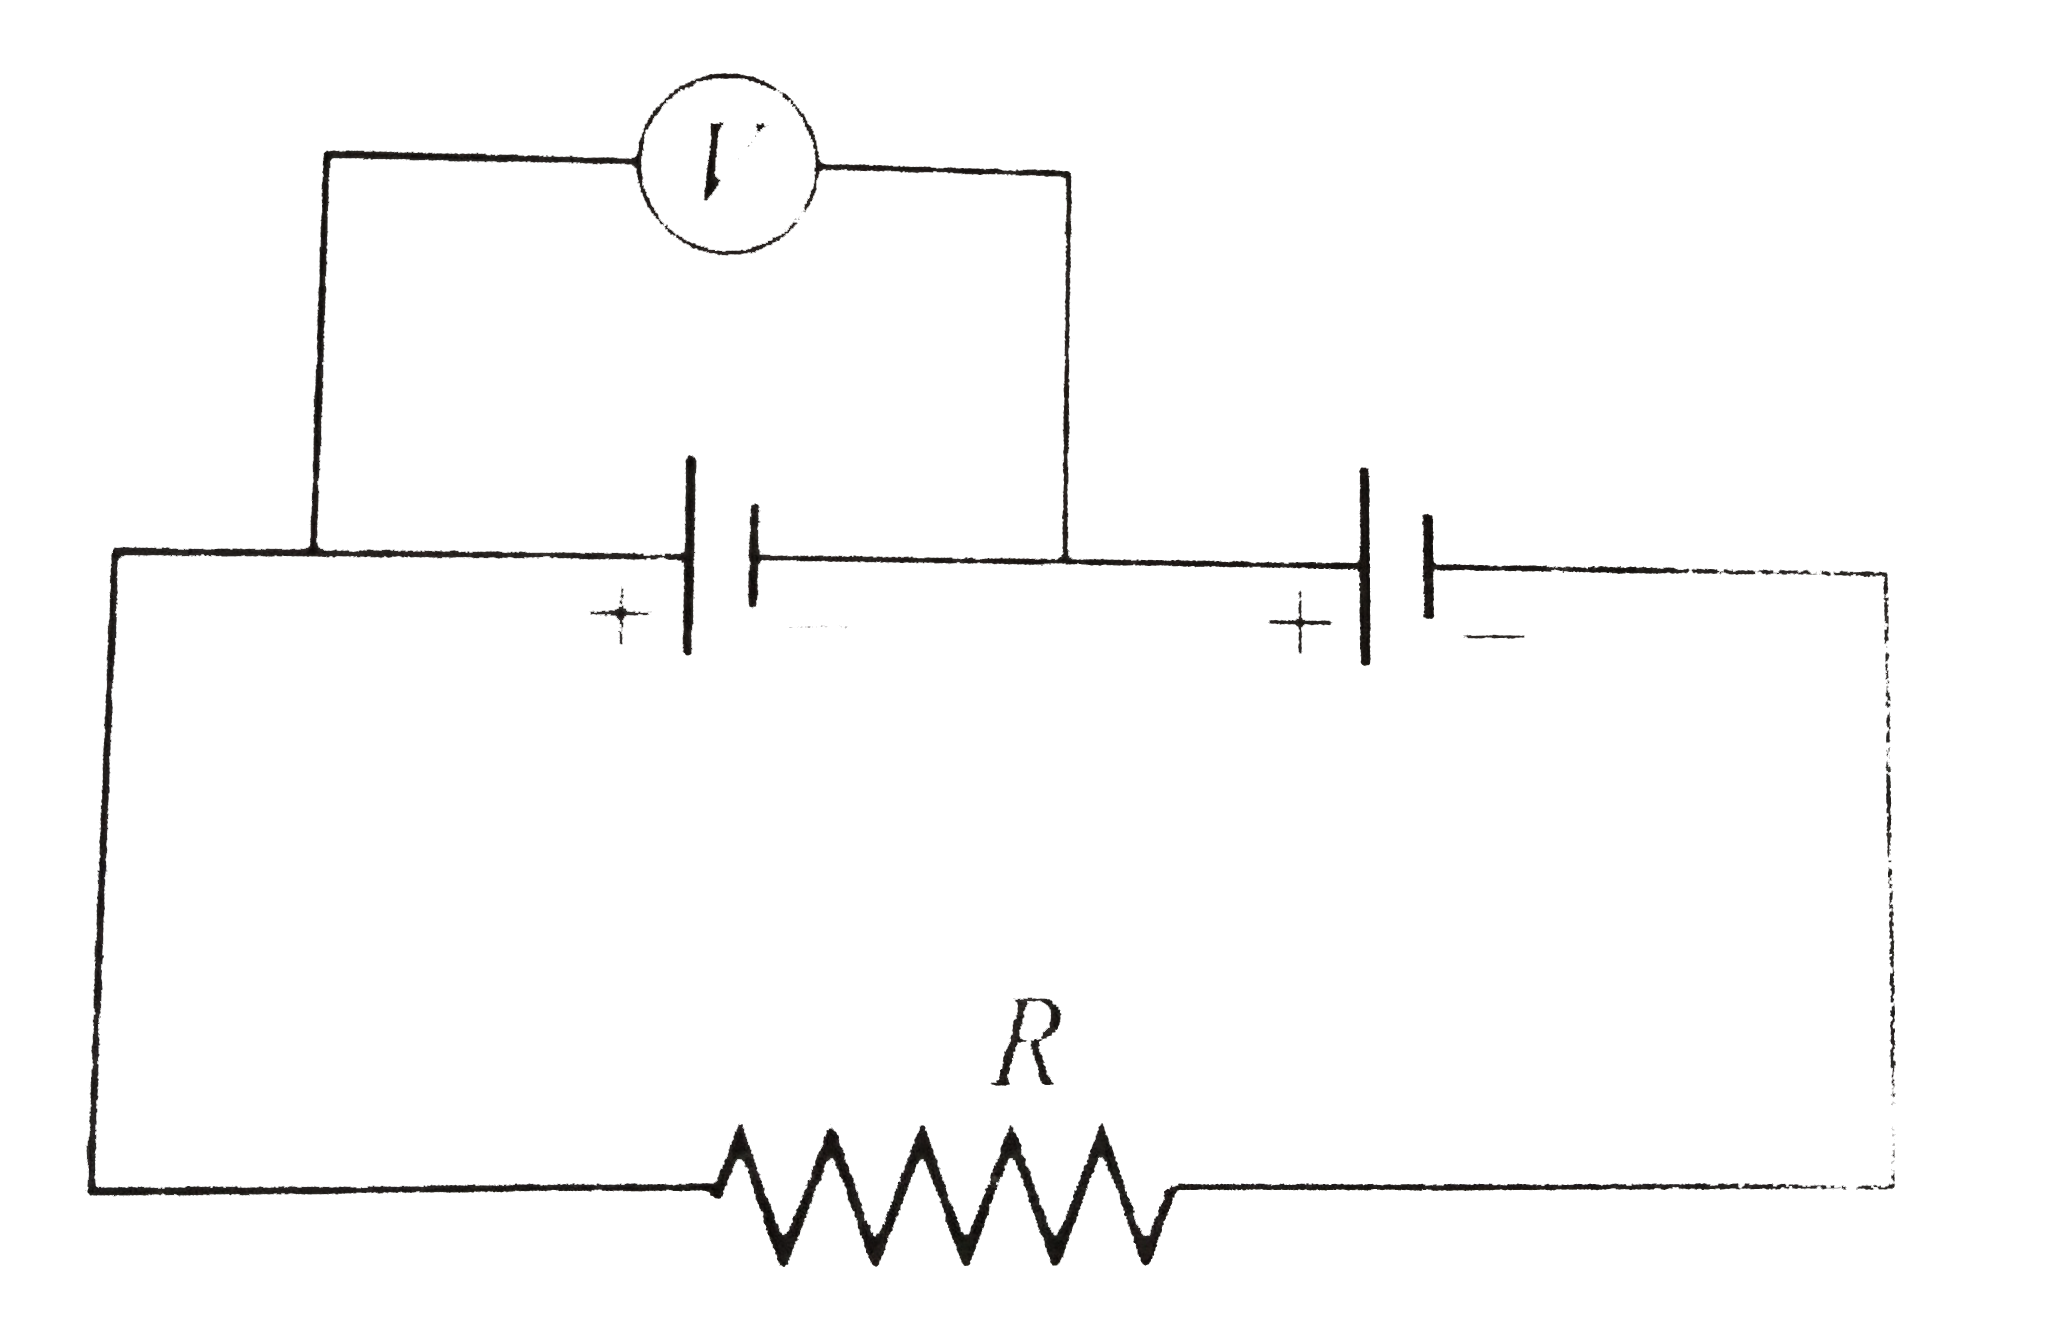 In Fig. A2.6, two cells have equal emf E but internal resistances  are r1 and r2. If the reading of the voltmeter is zero, then relation between R, r1 and r2 is